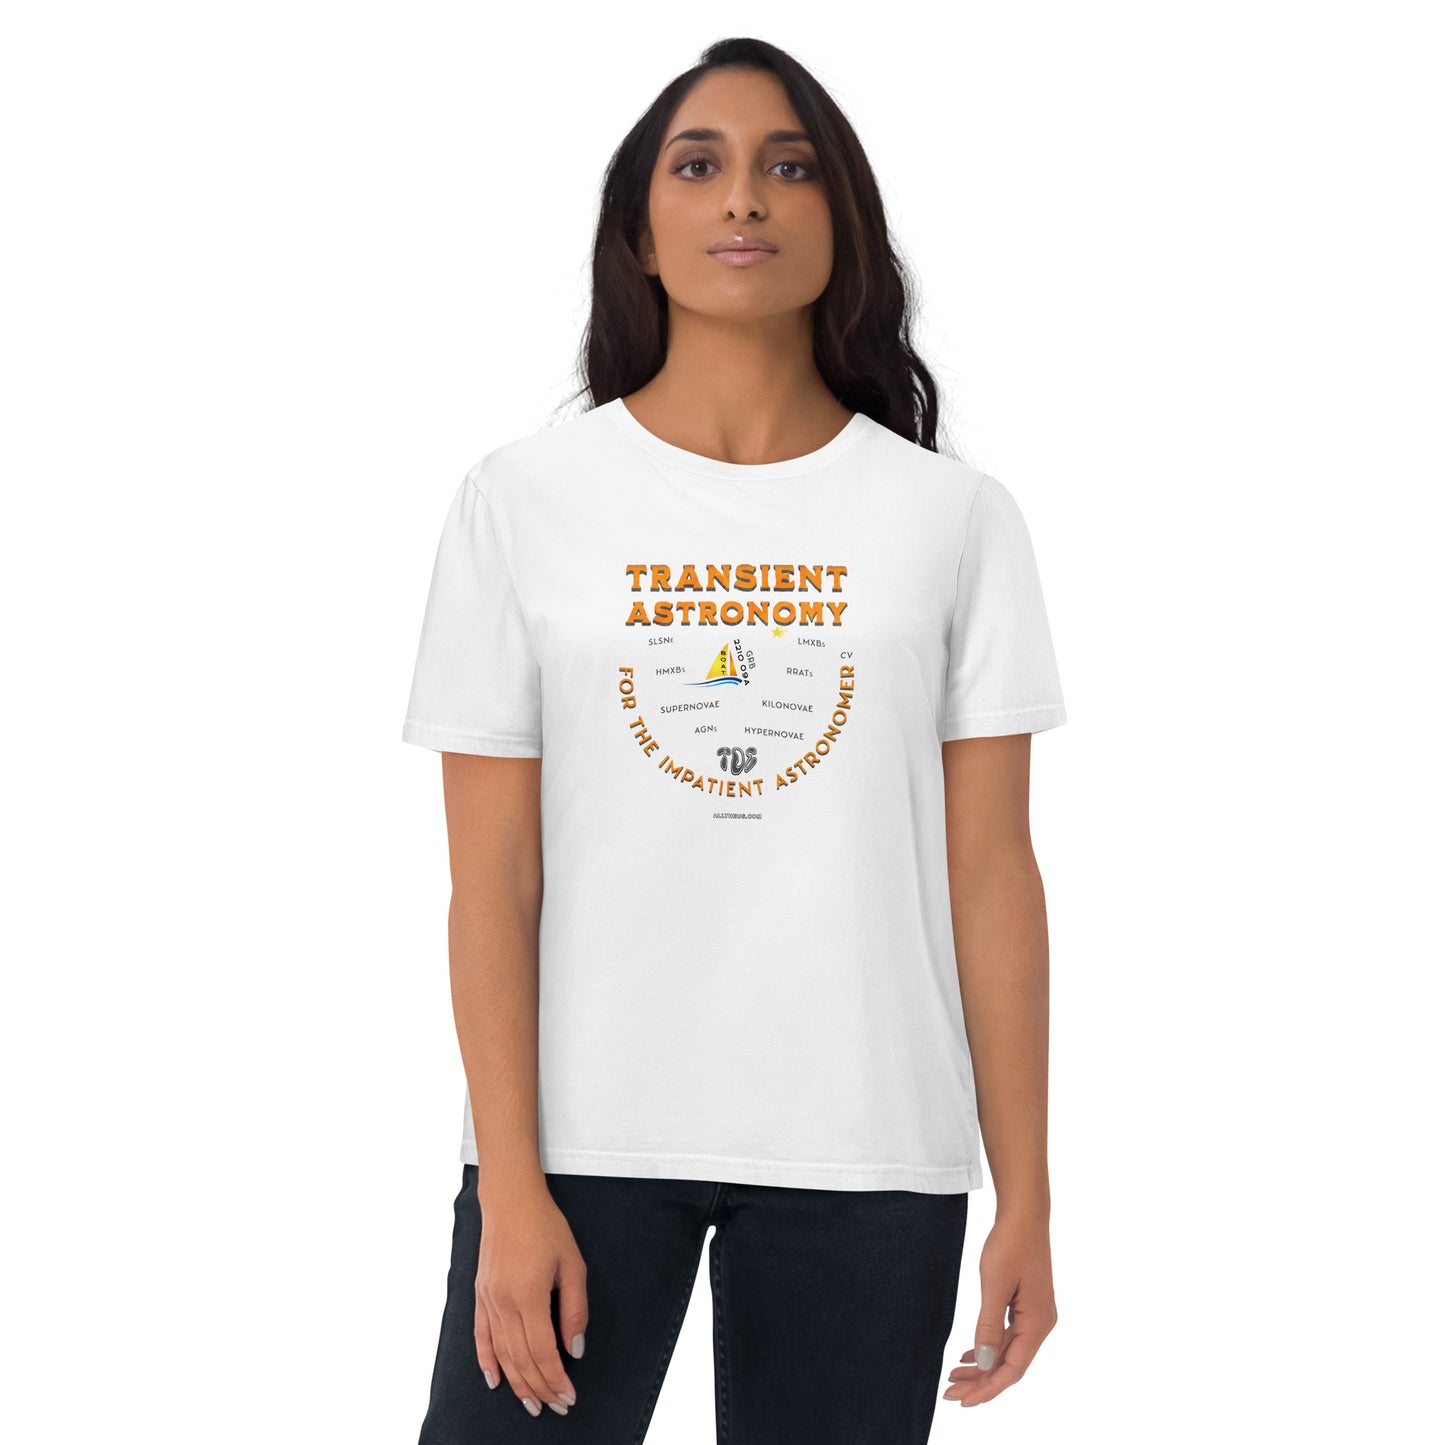 Unisex organic cotton t-shirt - Transient Astronomy, For The Impatient Astronomer